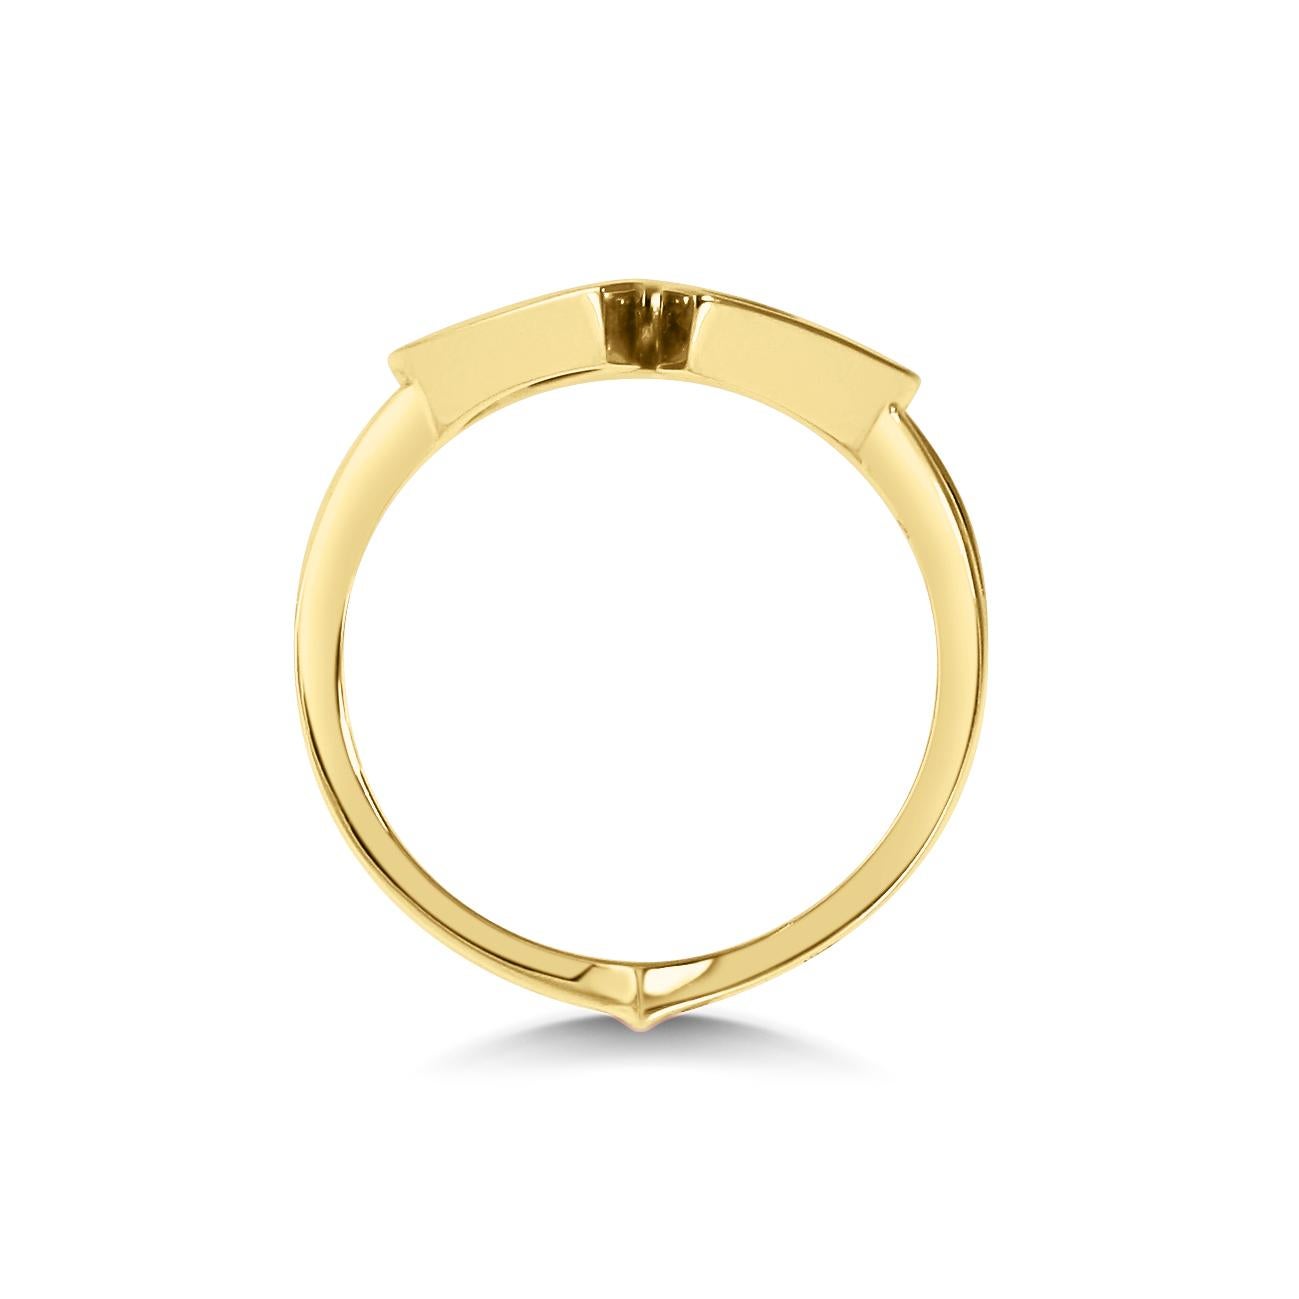 A symbol of strength and beauty, the Kali ring embodies the feminine and the fierce.
A sculptural, shaped statement ring ready to help you take on the world.

This Kali Ring is priced here in 18K Yellow Gold but are also available in 9K Yellow Gold.